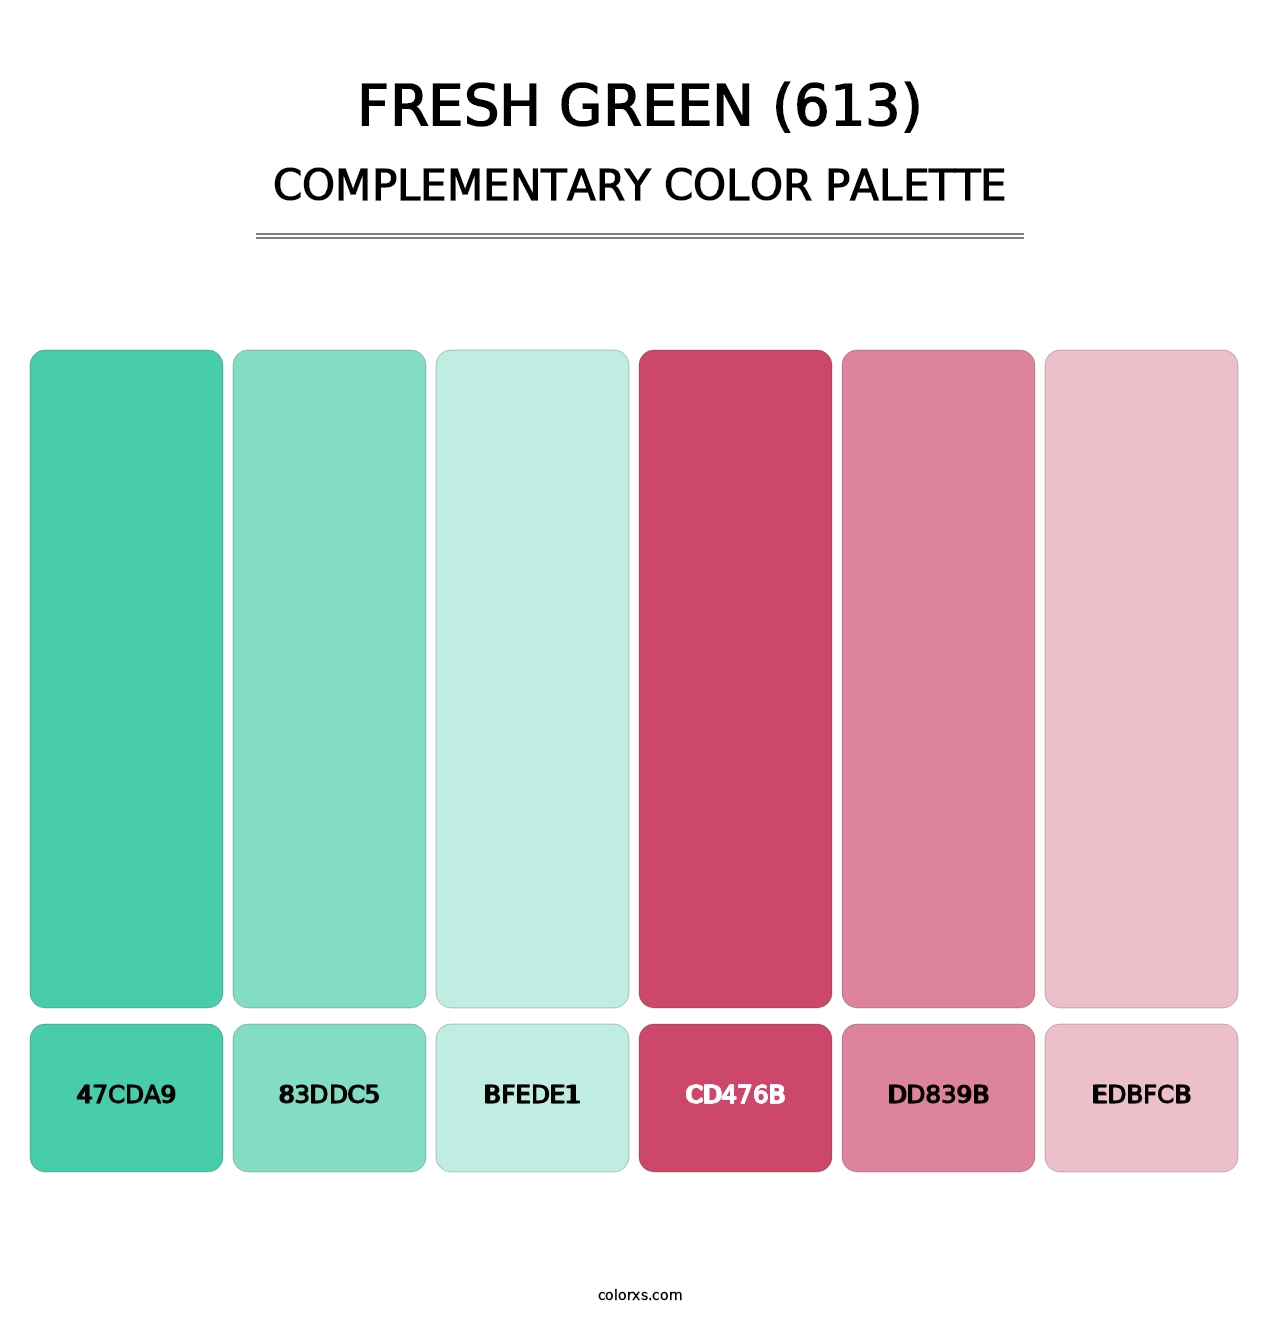 Fresh Green (613) - Complementary Color Palette